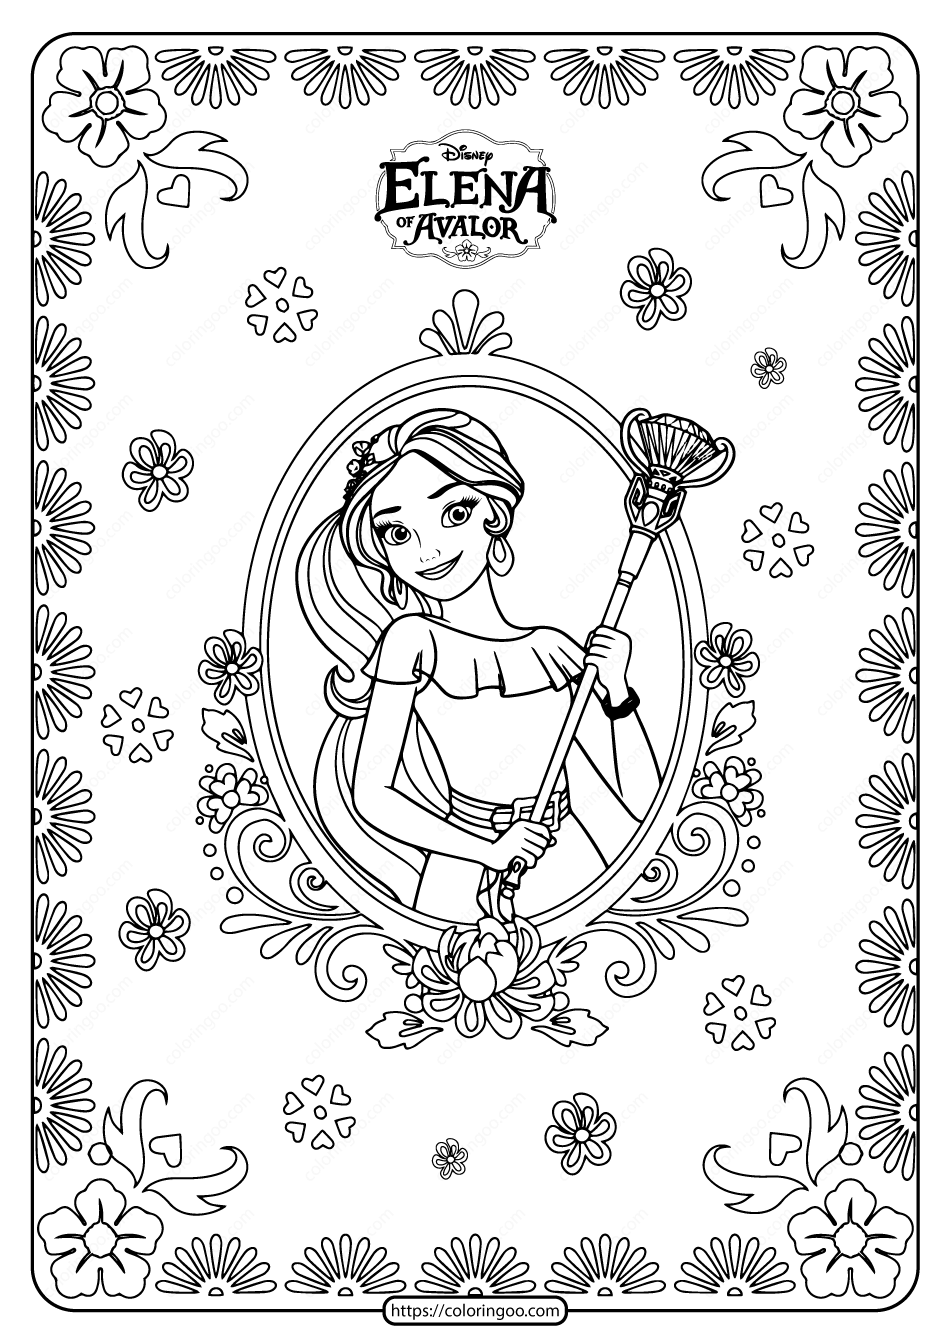 Printable Princess Elena Of Avalor Coloring Pages